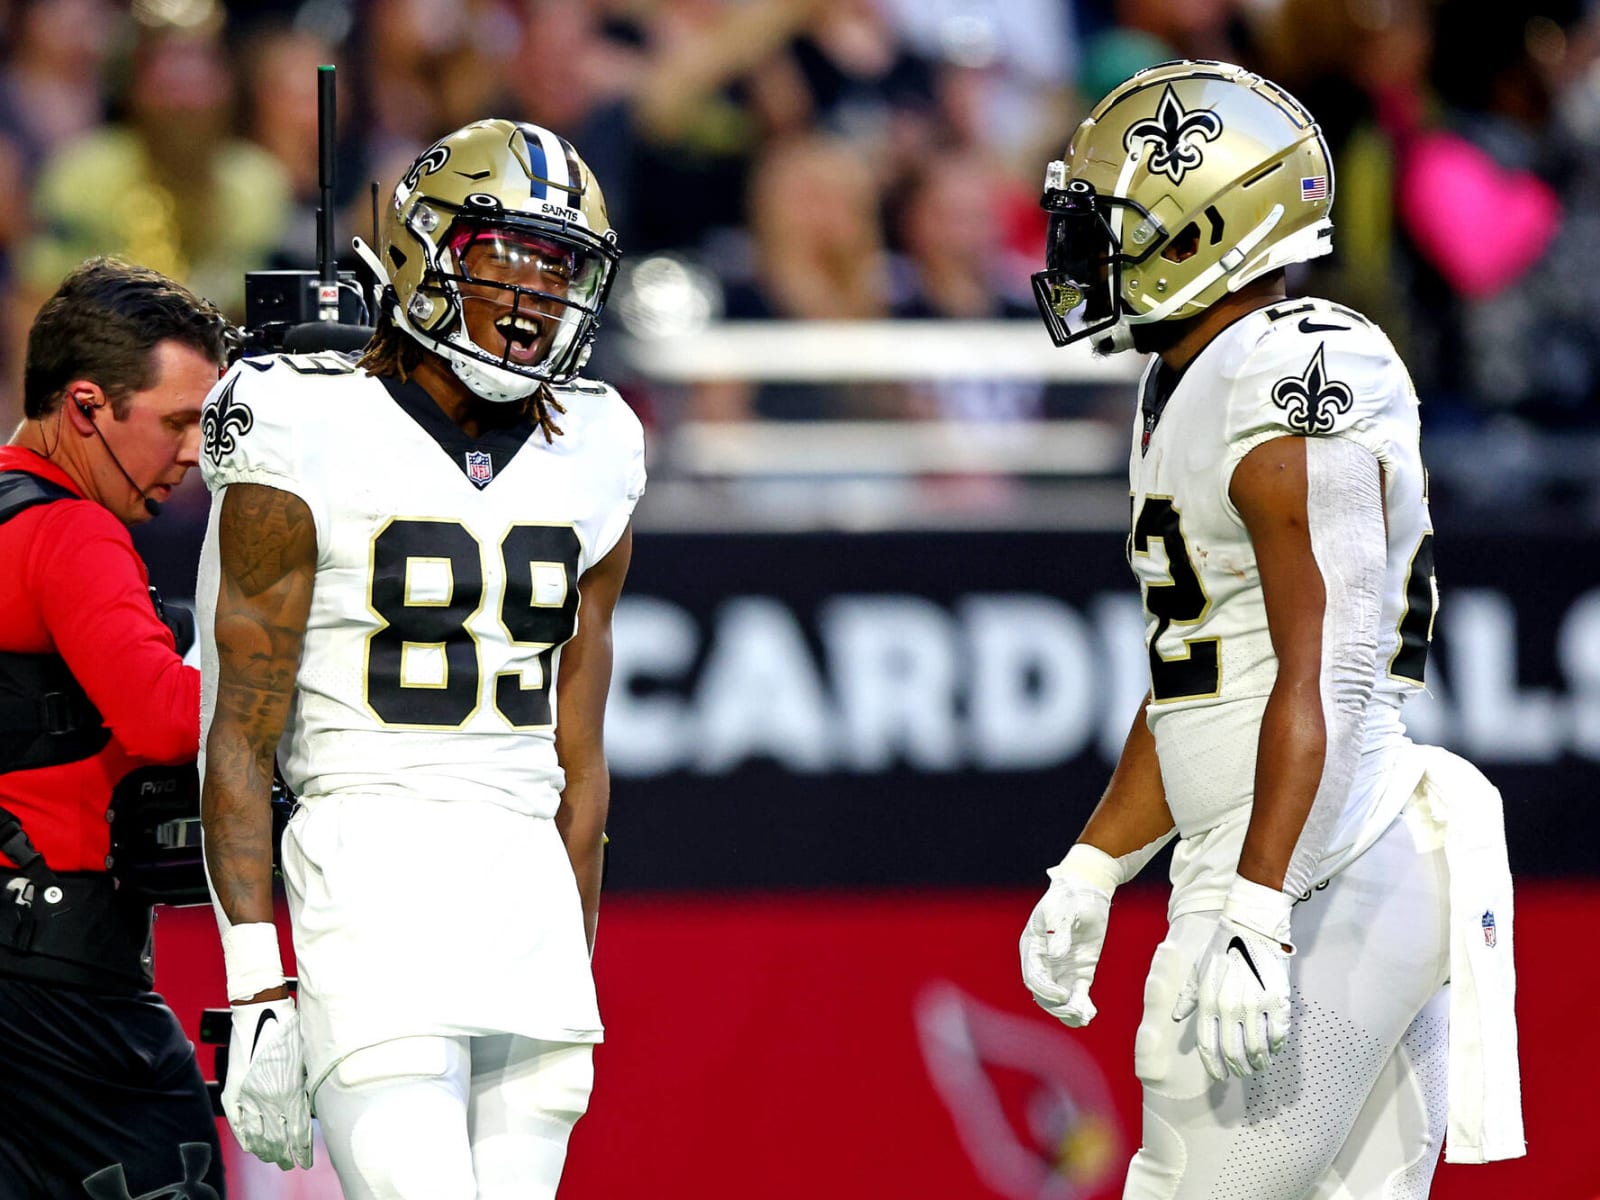 Saints WR Rashid Shaheed Scores On First Touch In NFL